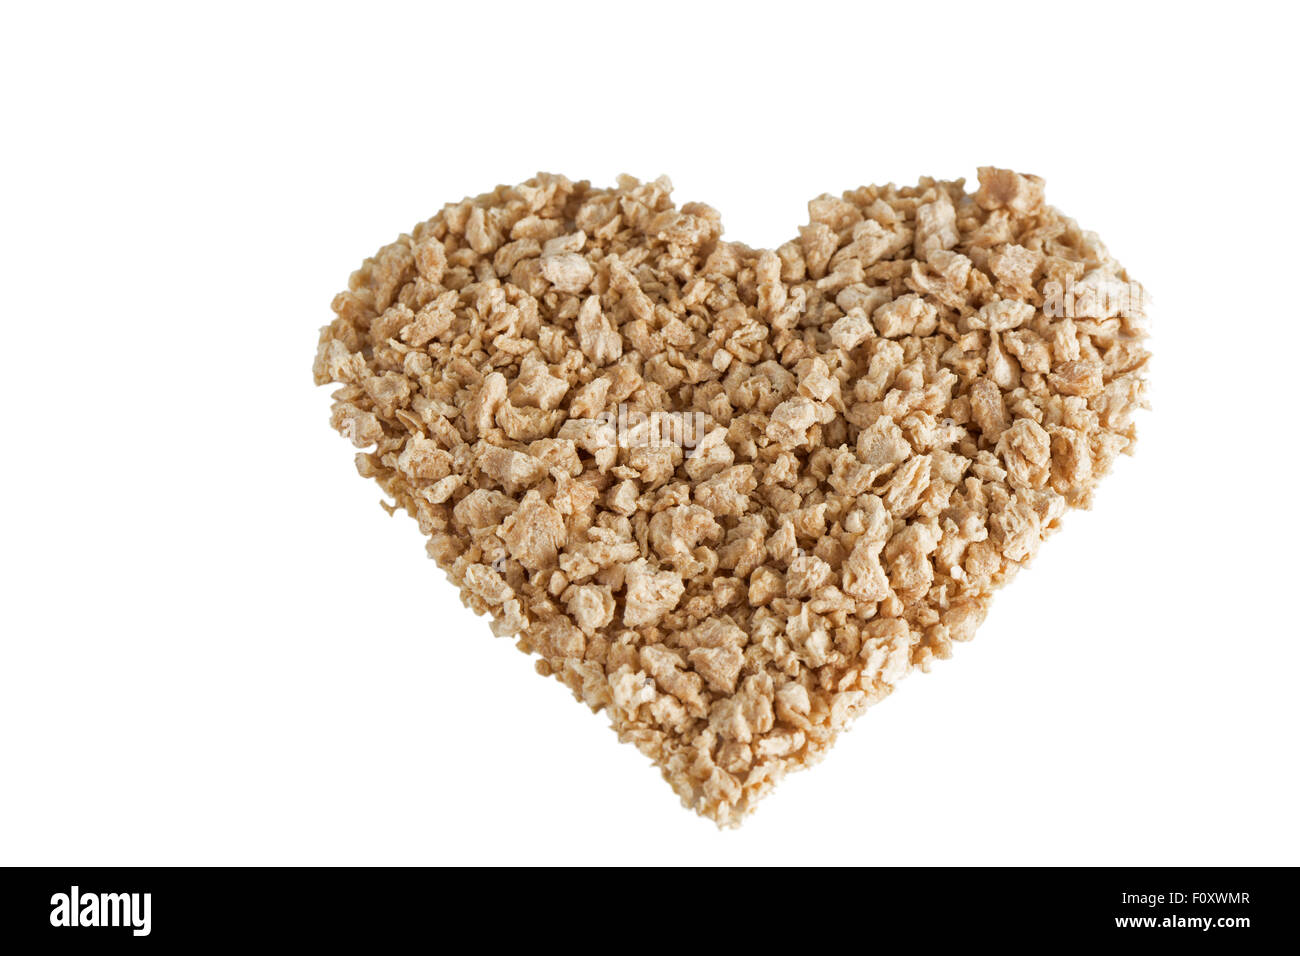 Heart shape made of textured soy protein granules, tilted angle, isolated on white background. Stock Photo